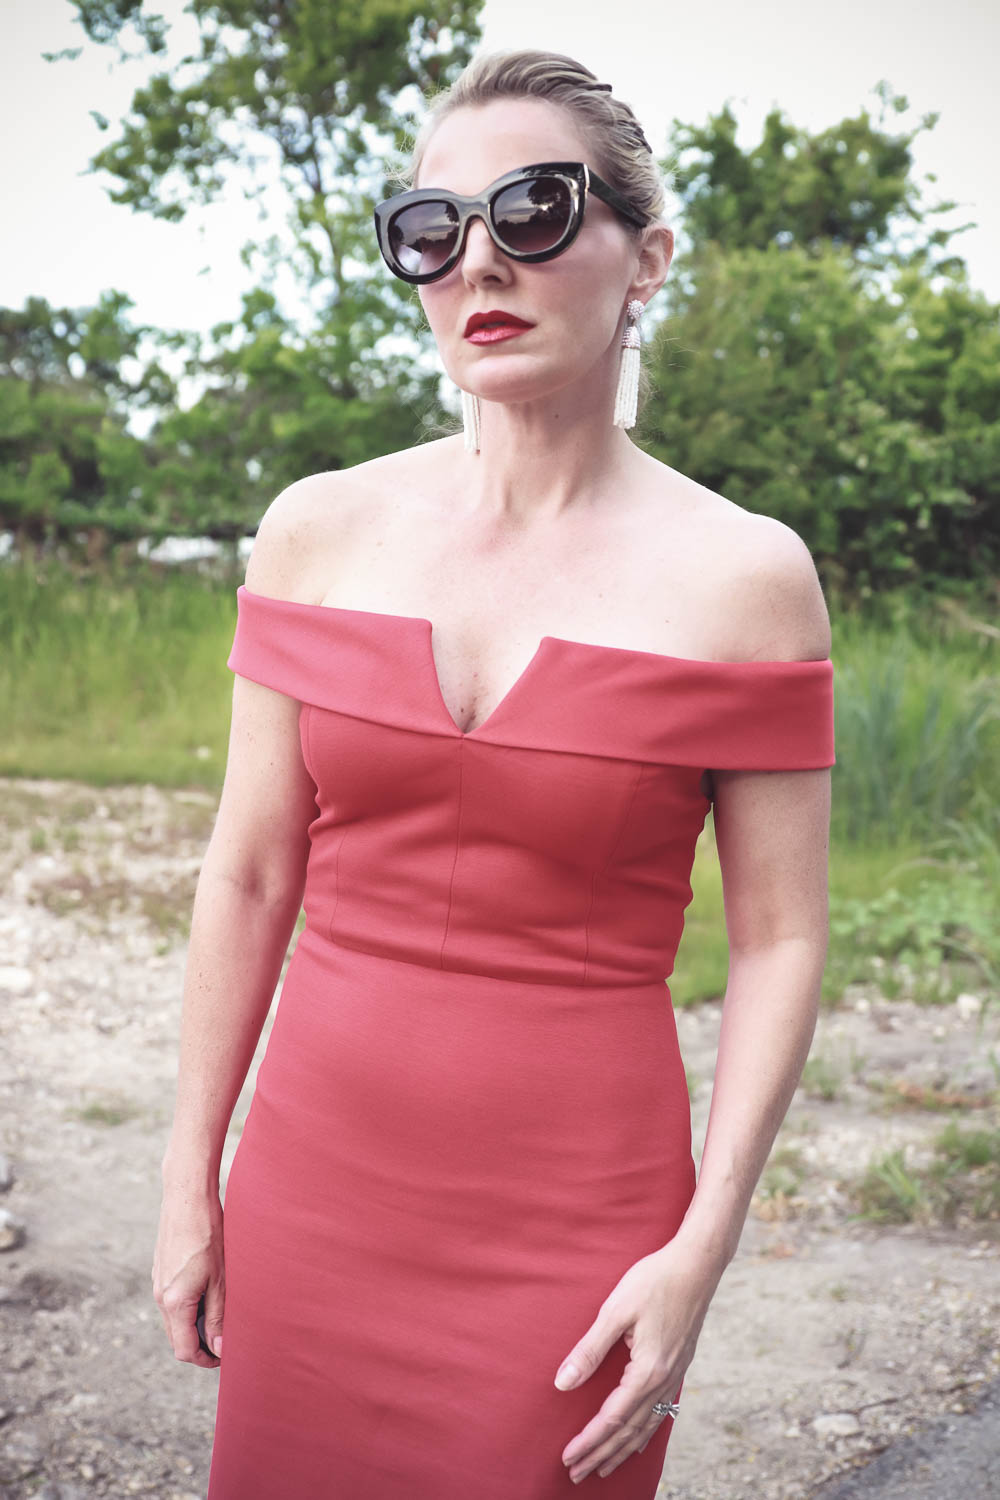 What to wear to a wedding as a guest, women's dresses, outfit ideas for special events and weddings, fashion over 40, Featuring Erin Busbee, BusbeeStyle.com, fashion blogger and Fashion youtuber for busy women over 40